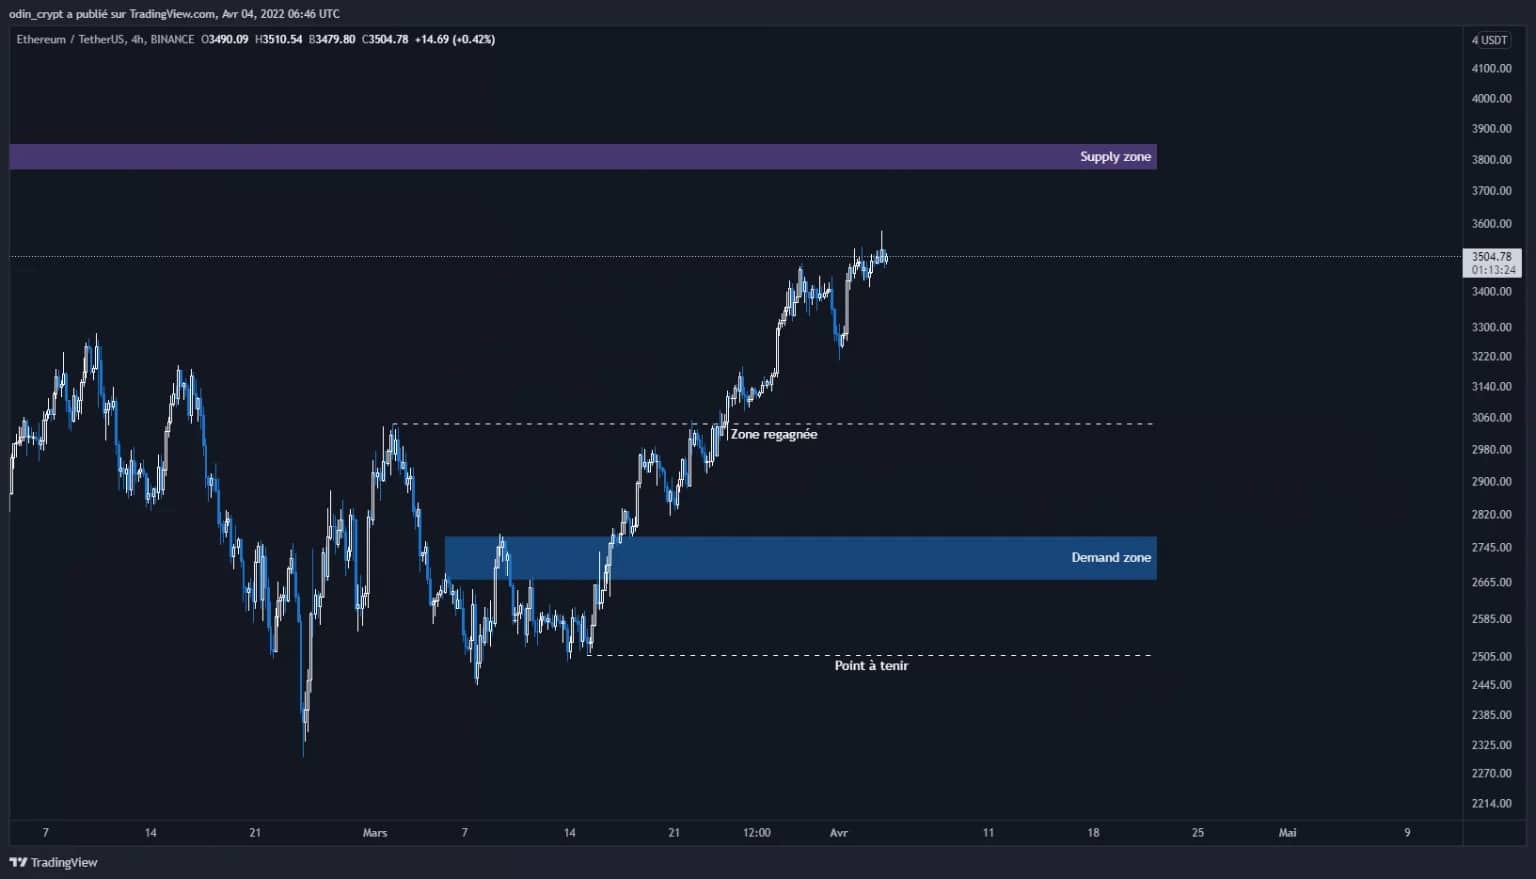 Ether (ETH) analyse in 4h